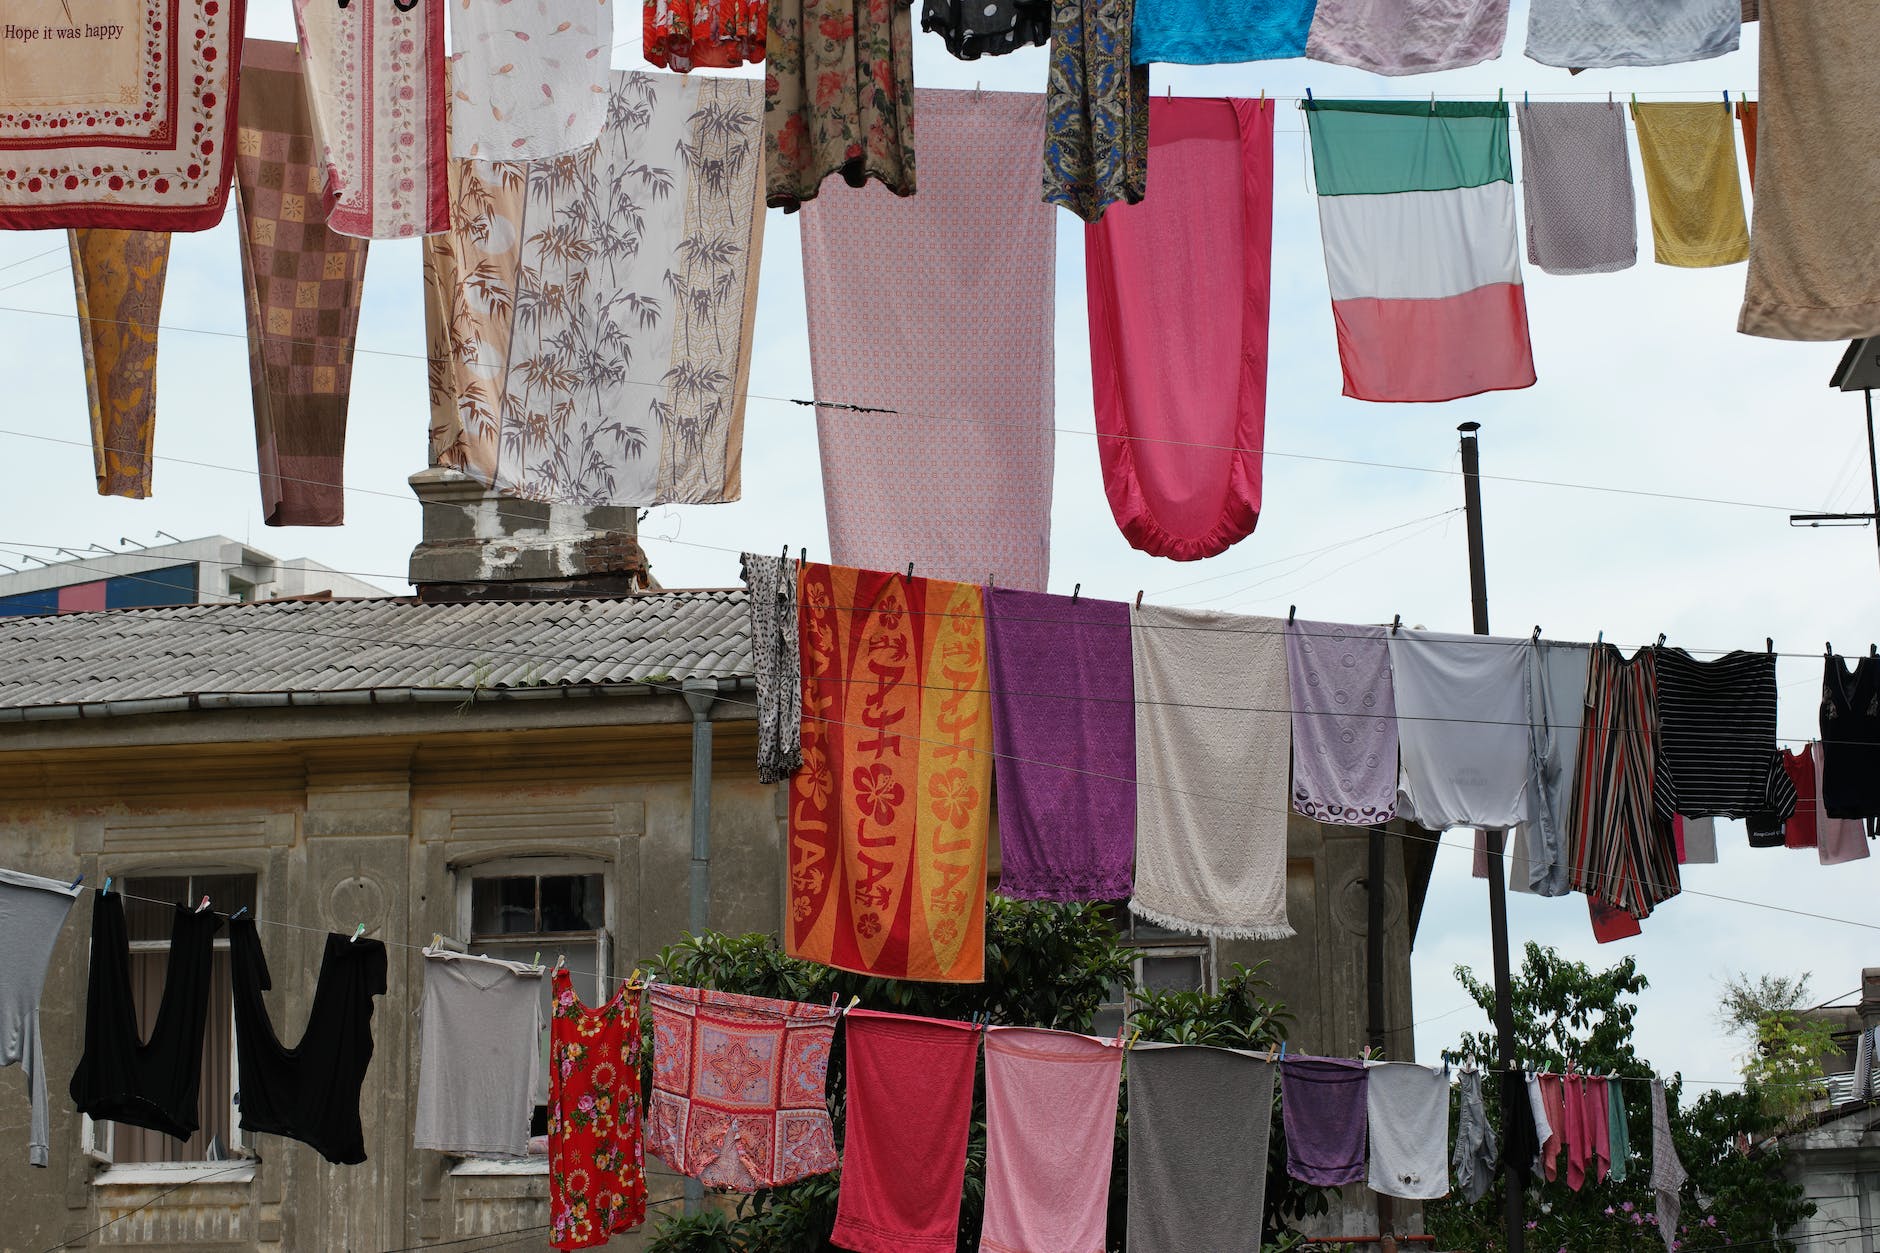 colorful lines of clothing hung up outside between buildings